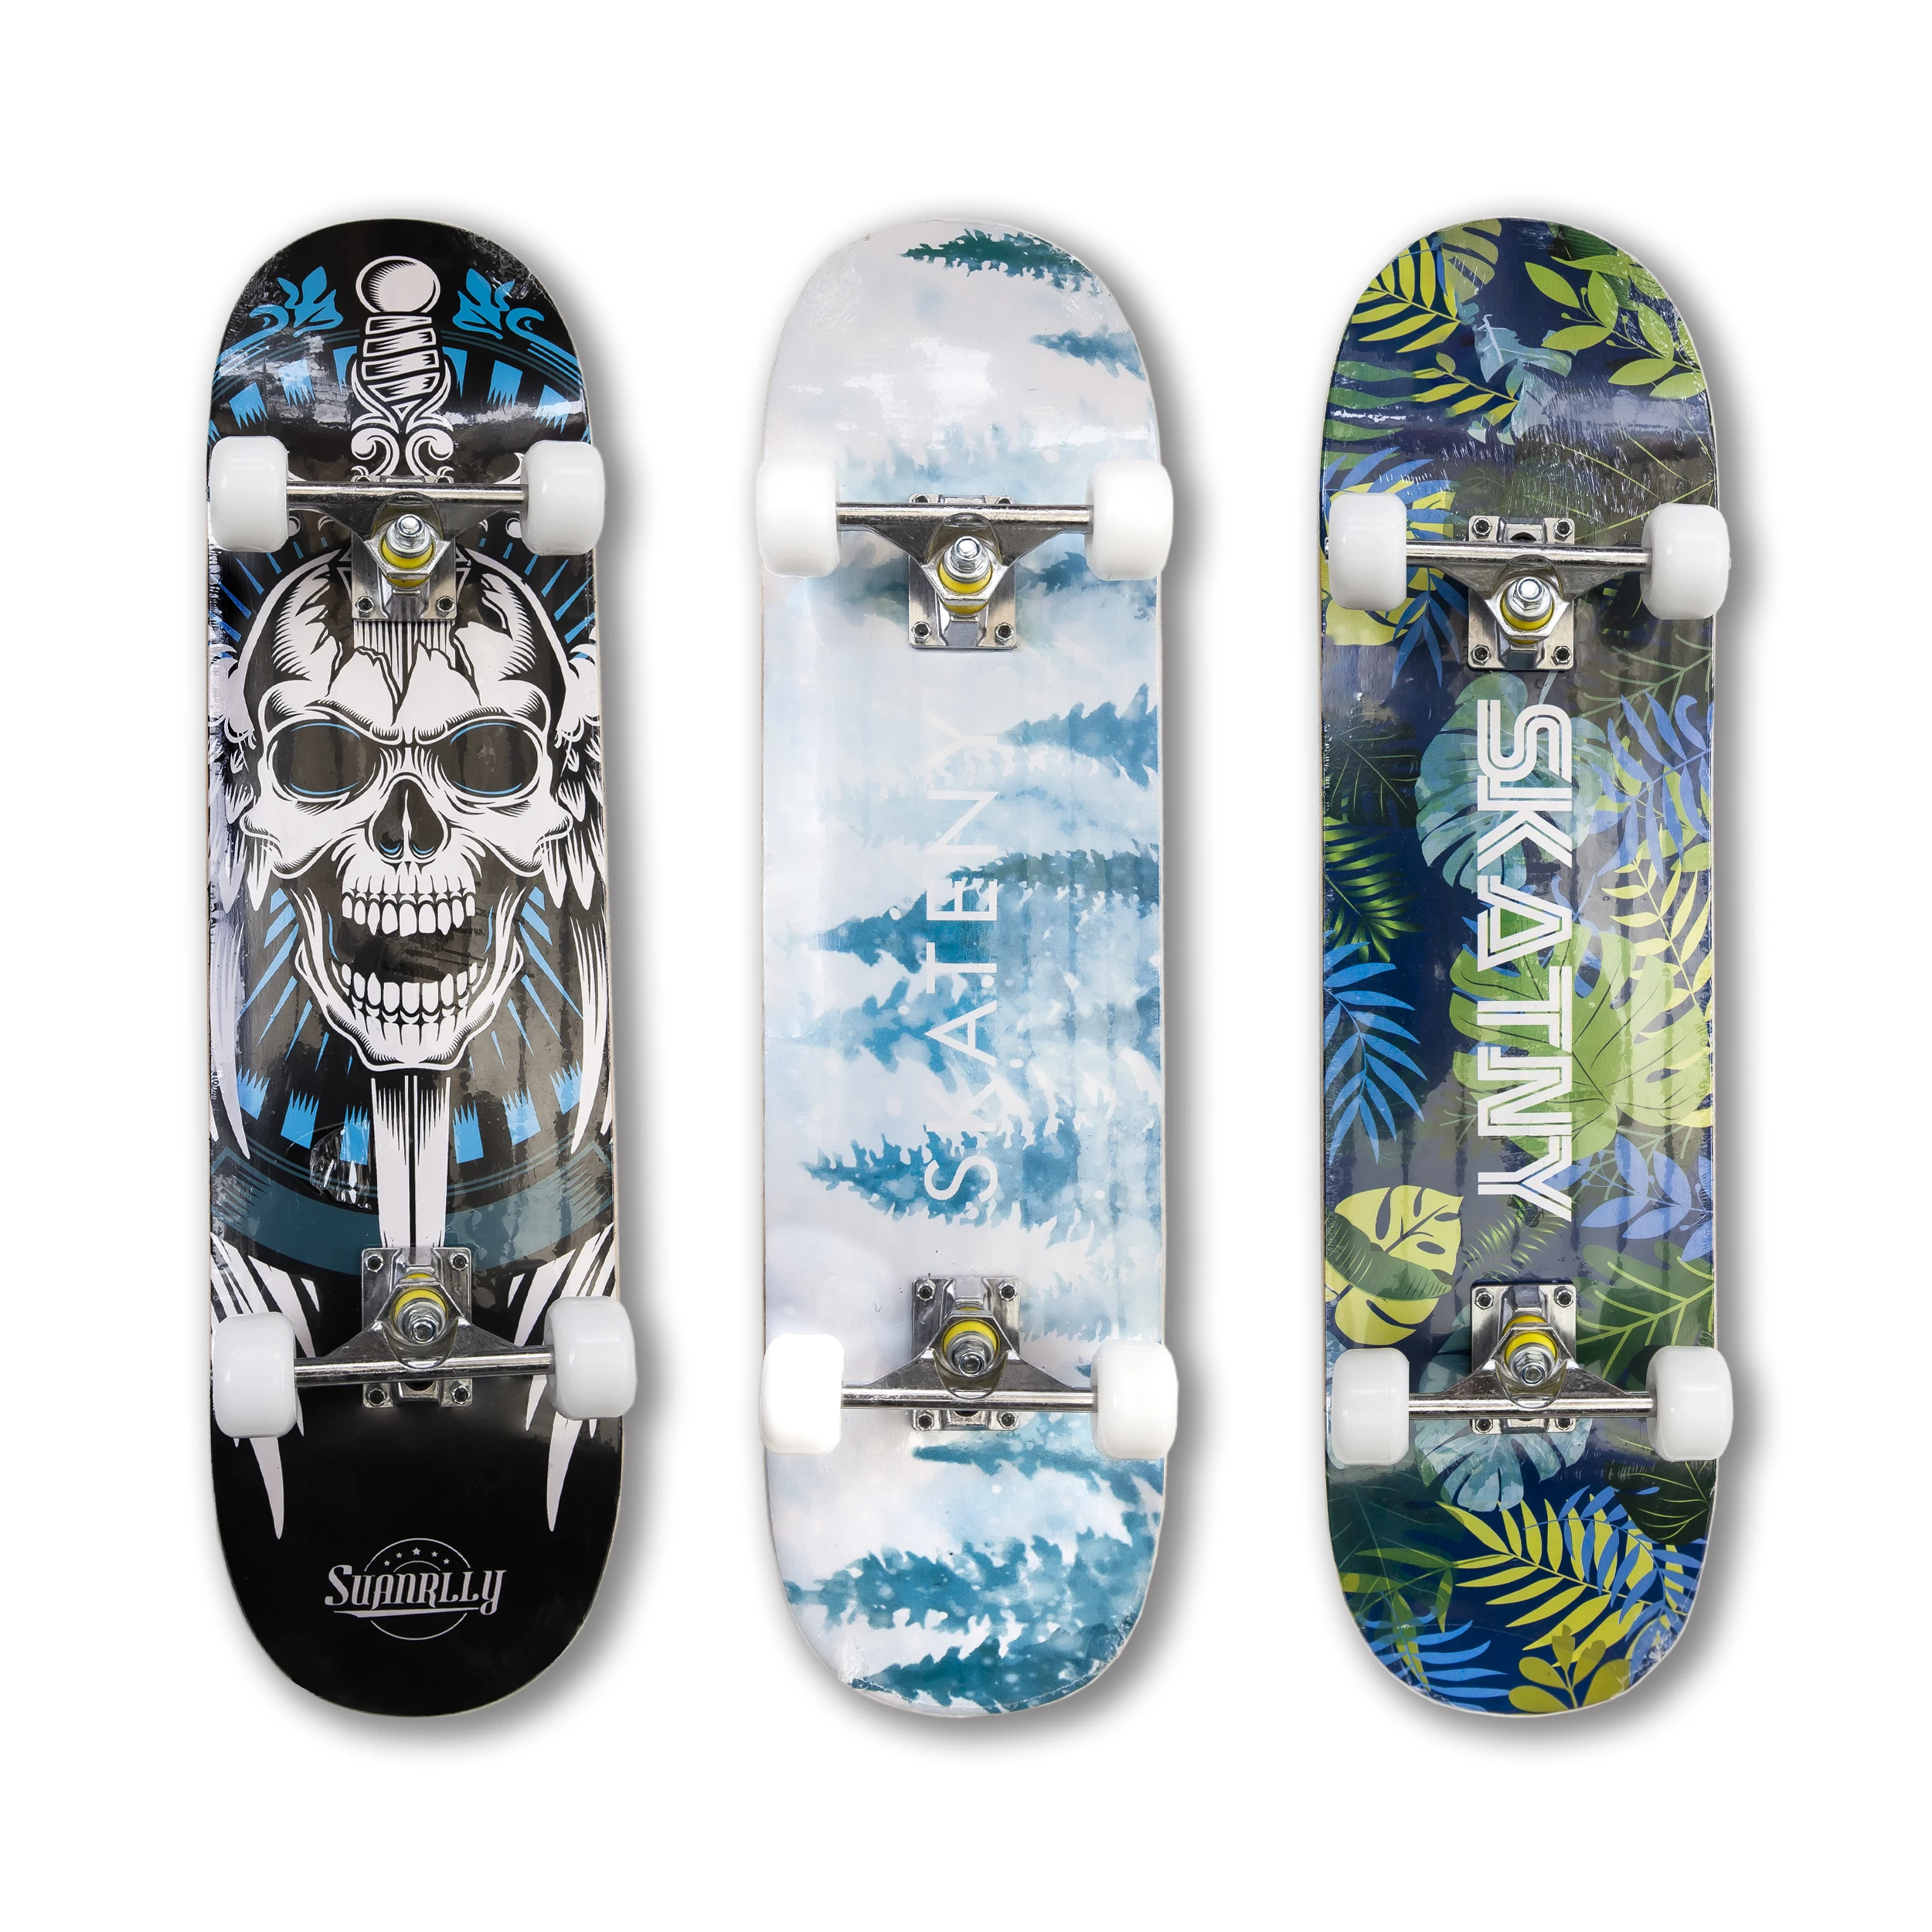 Hot Sale Stock in Trade 7 Ply Northeast Maple Complete Standard Skateboard  with Pu Wheels For Teens Adults